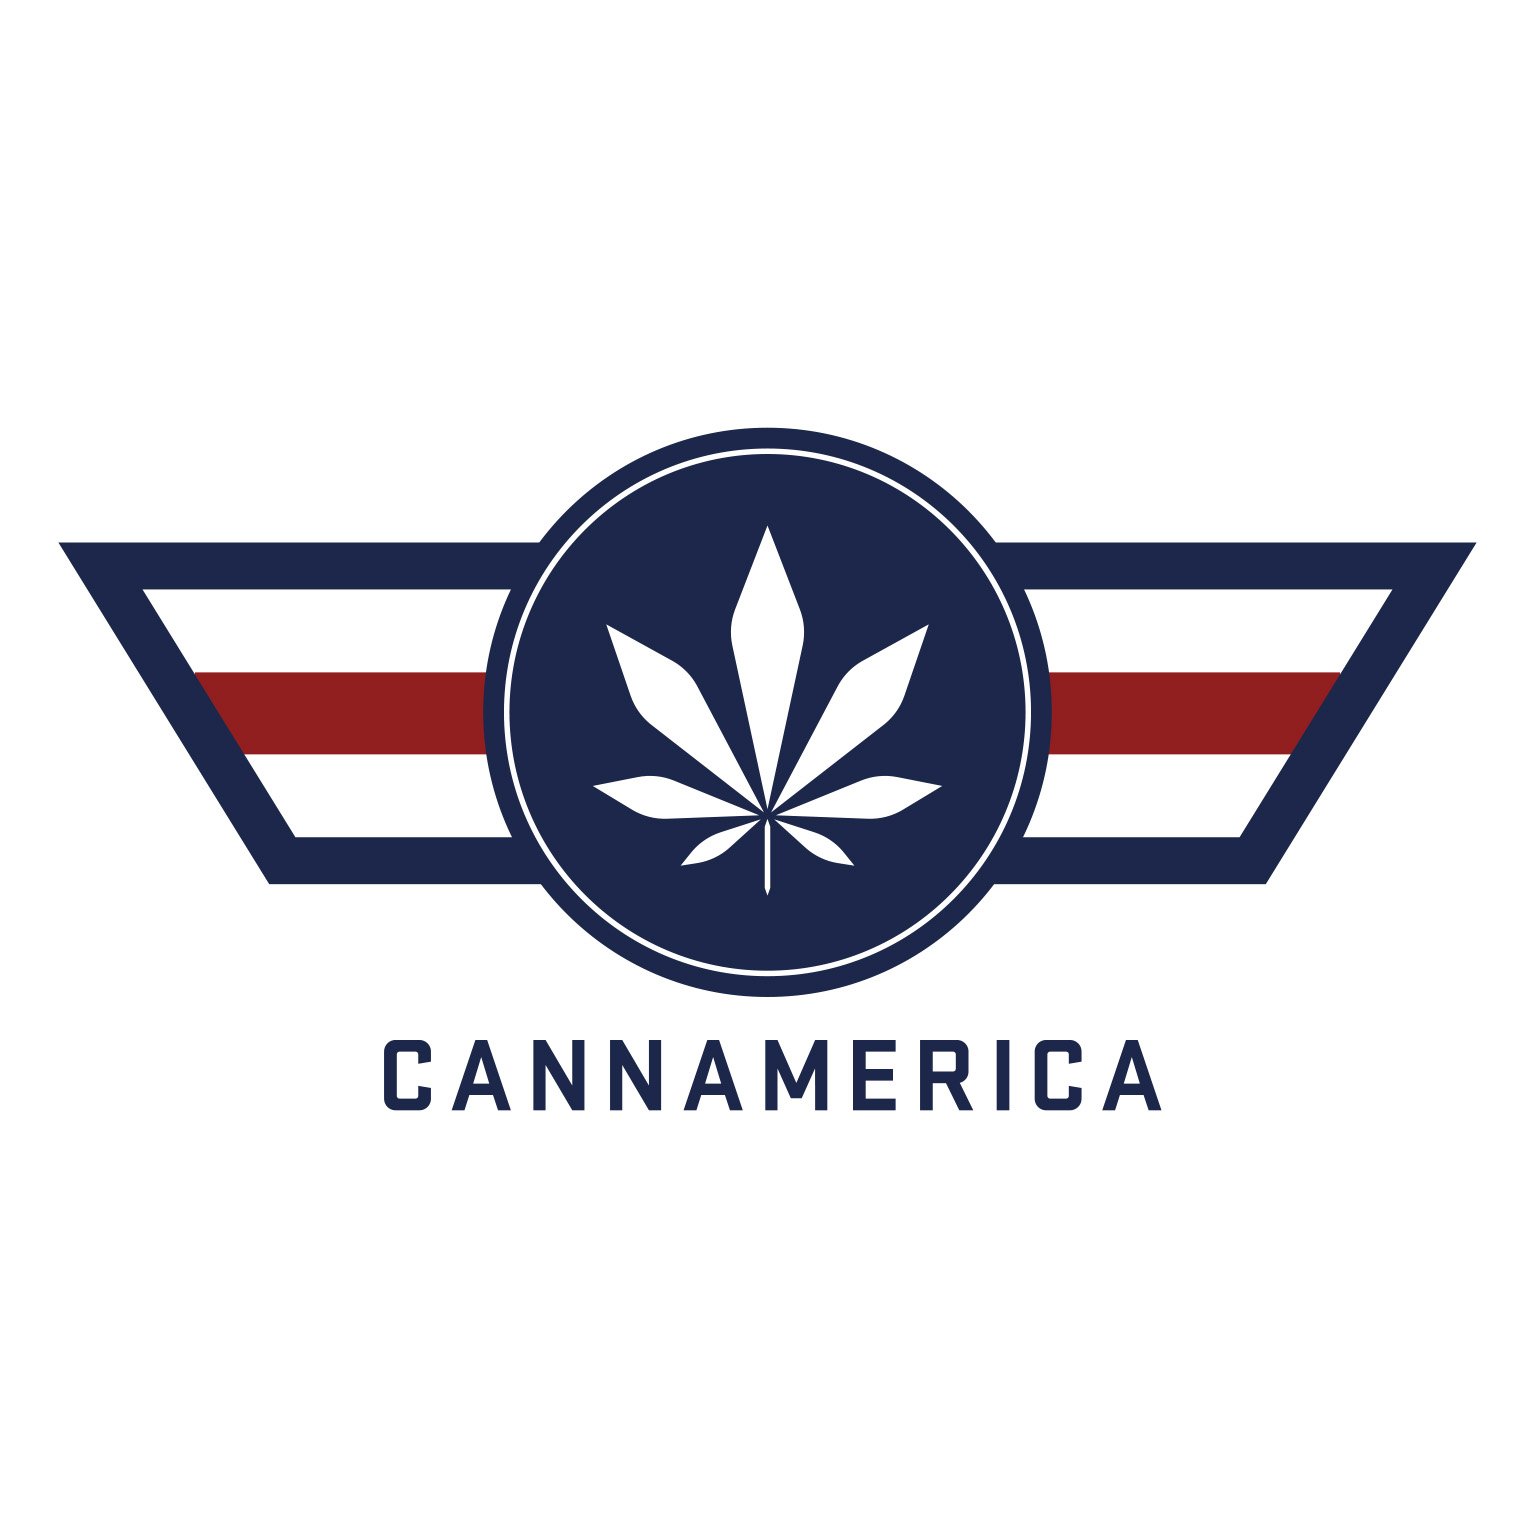 CannAmerica offers licensed and regulated cannabis businesses around the world the opportunity to manufacture and distribute quality products. CSE: $CANA